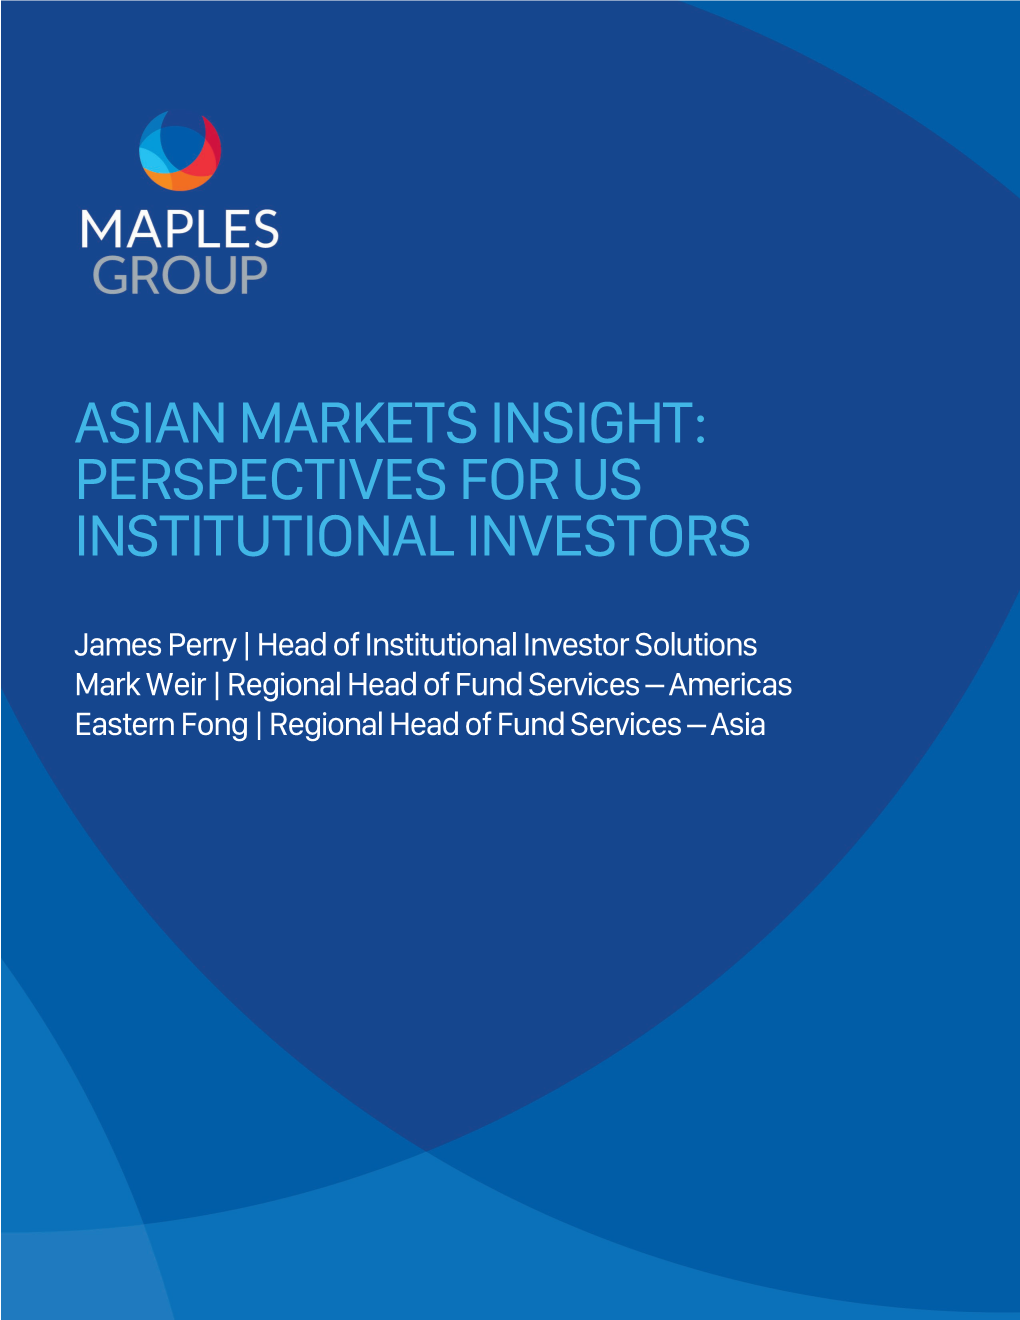 Asian Markets Insight: Perspectives for Us Institutional Investors